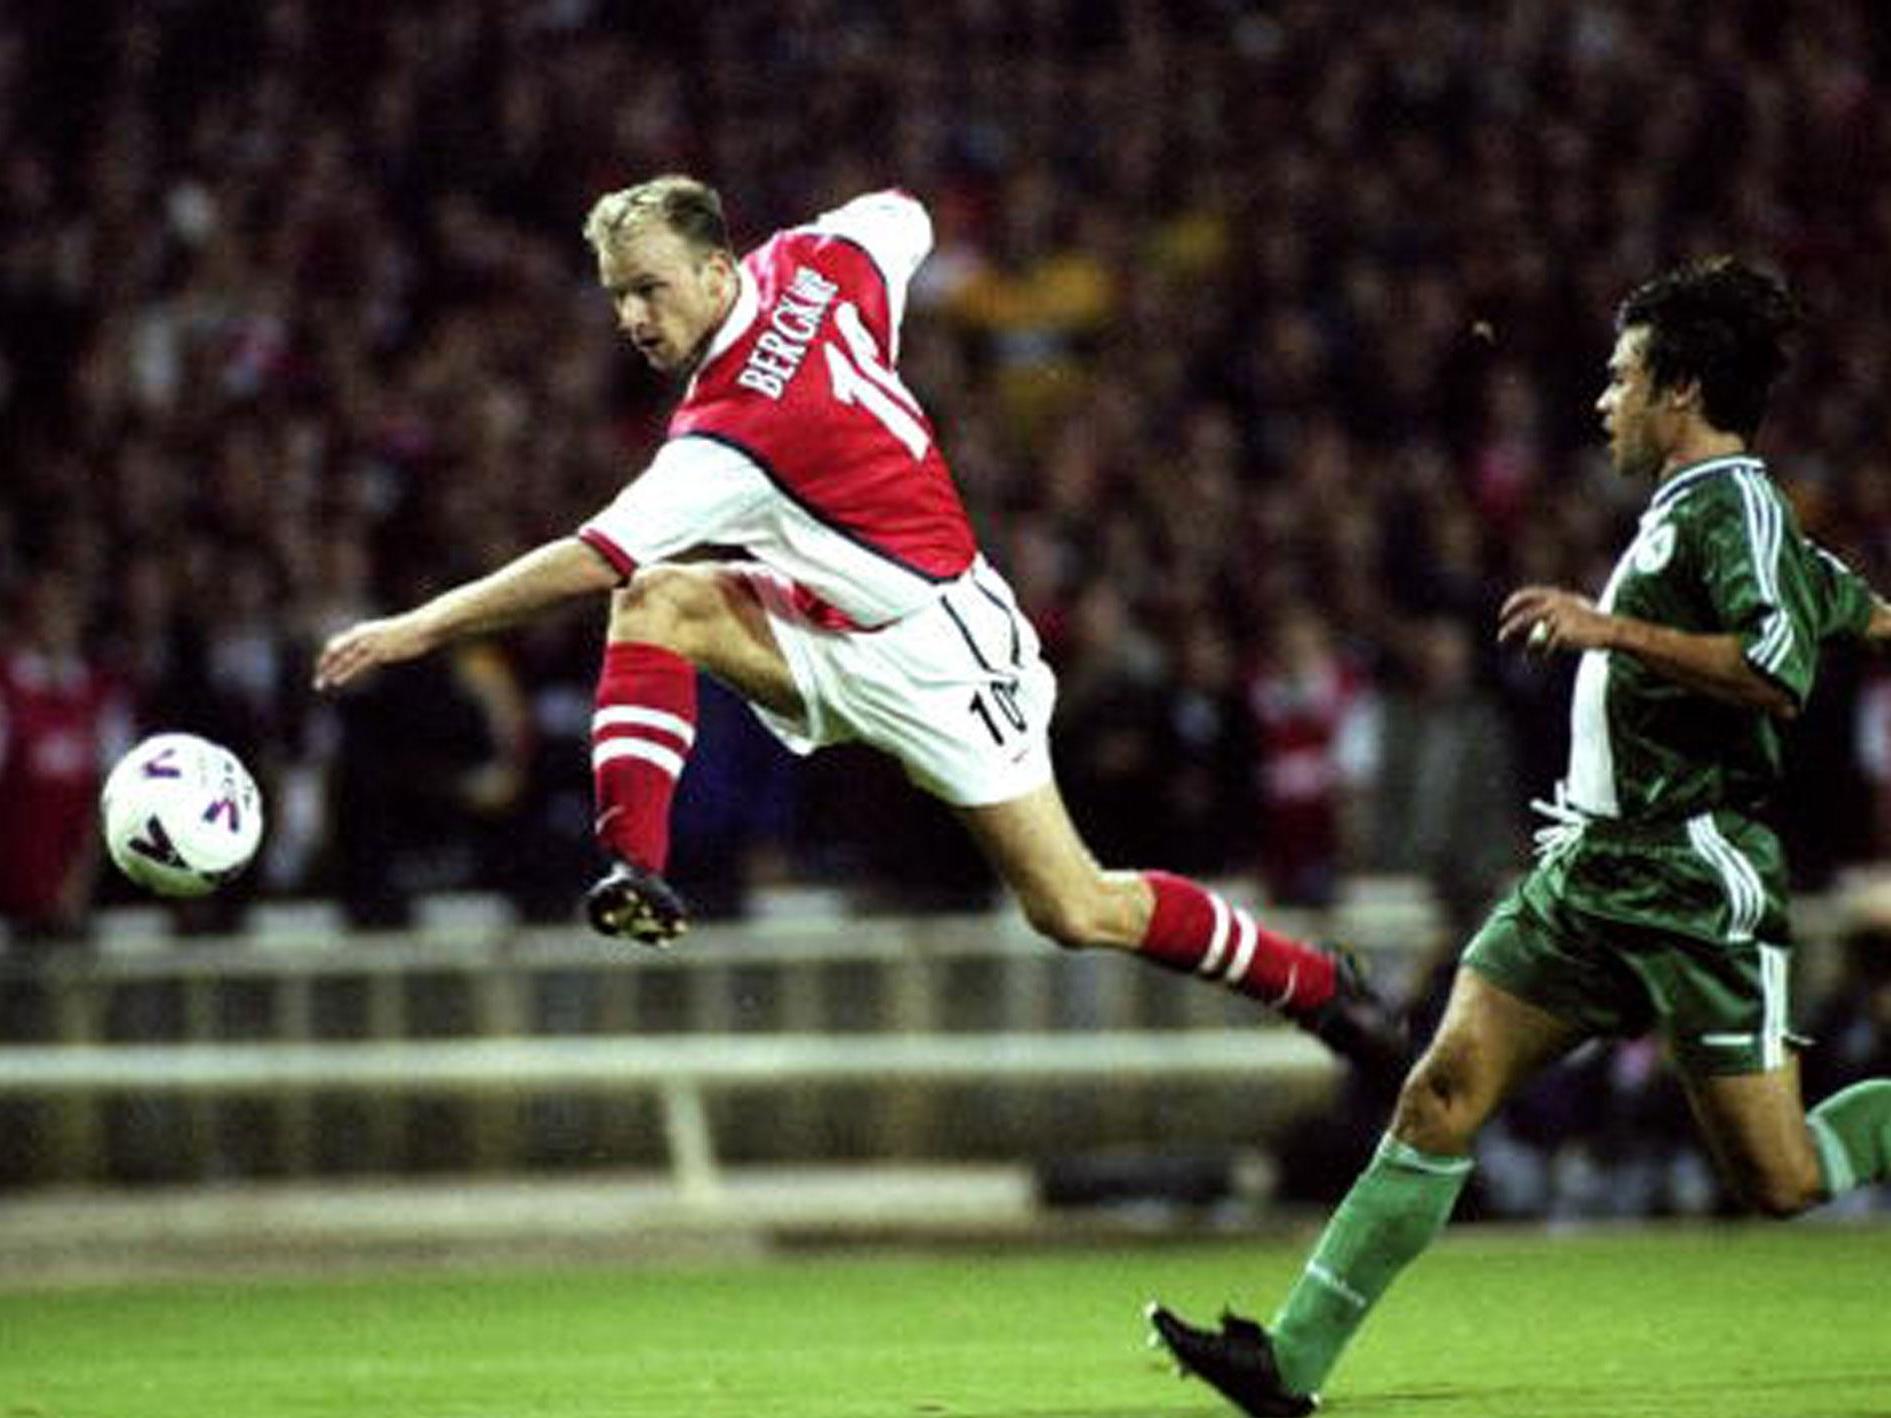 Dennis Bergkamp shoots for goal against Panathinaikos in Arsenal's first Champions League match at the old Wembley in 1998 (Getty)